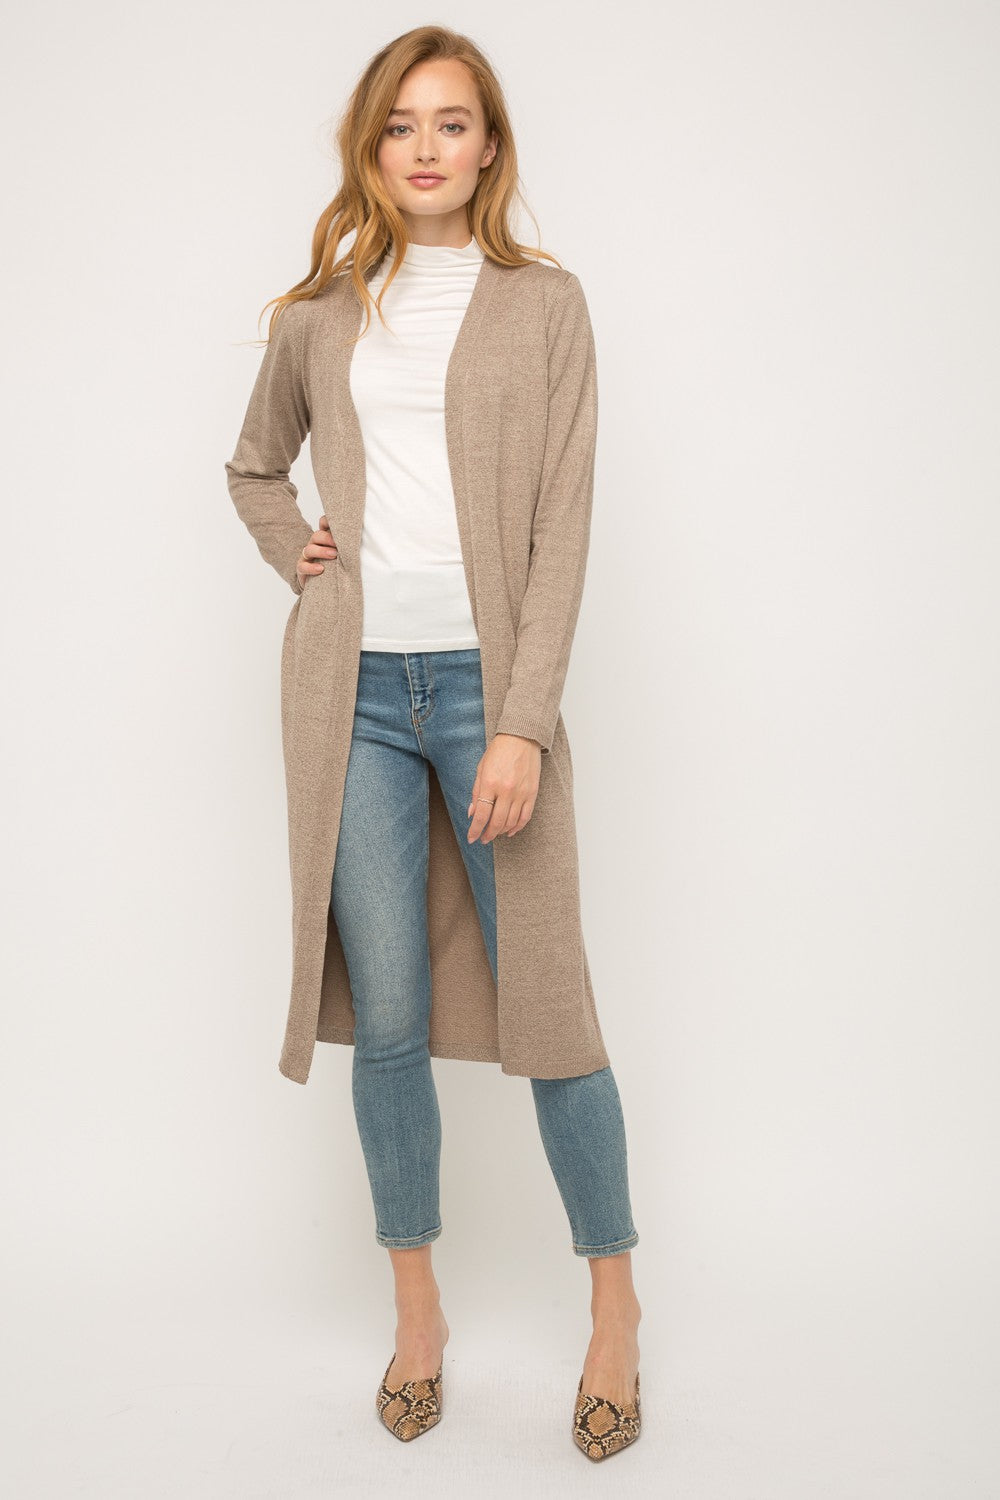 Long Open Front Cardigan Sweater